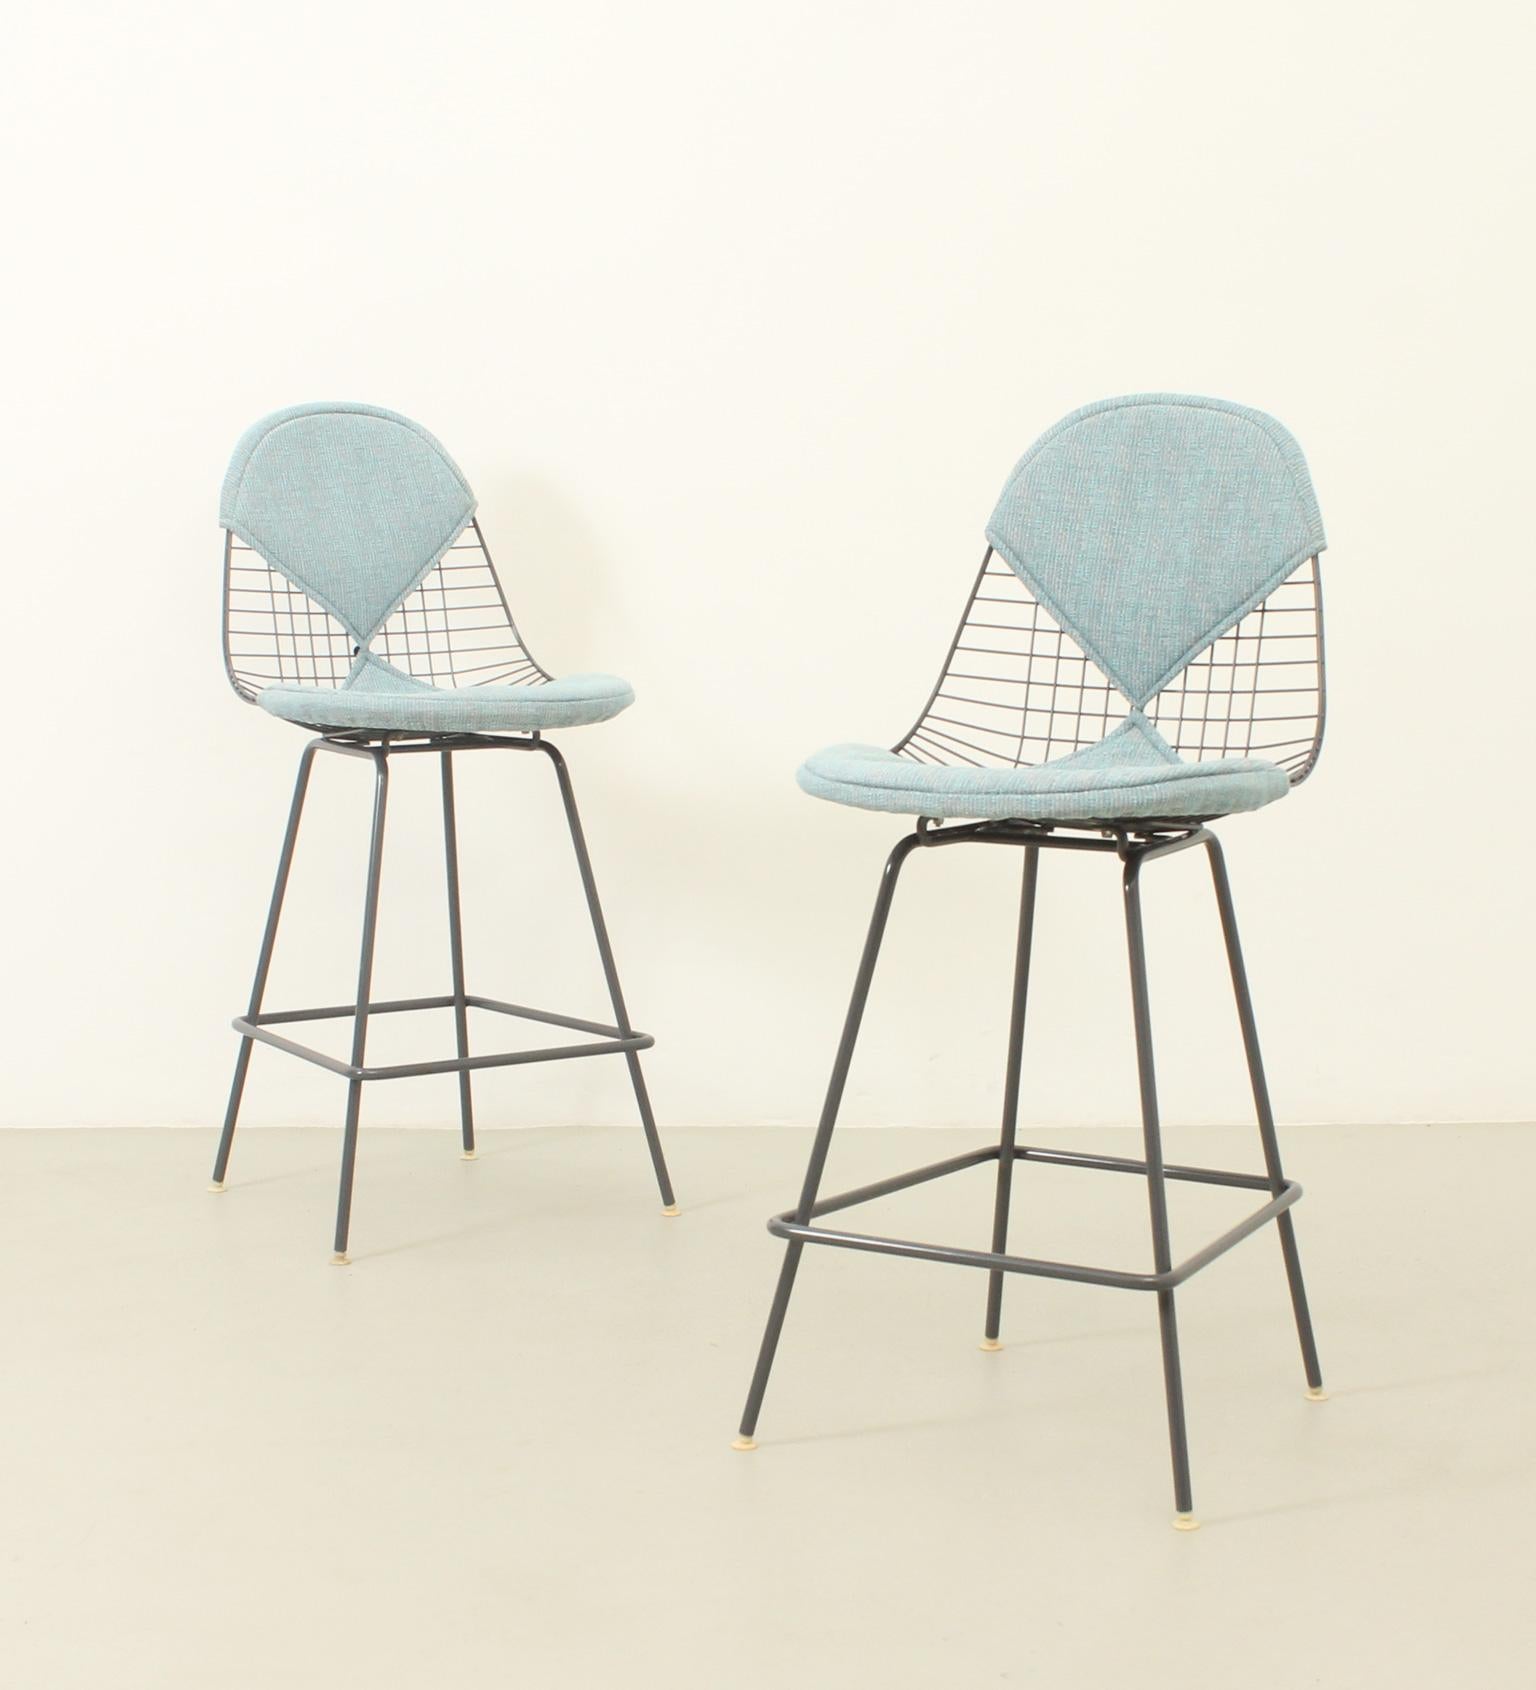 Pair of Wire stools designed by Charles and Ray Eames for Herman Miller, USA, 1960's. Special edition with steel structure re-lacquered in dark gray and new bikini pads. 